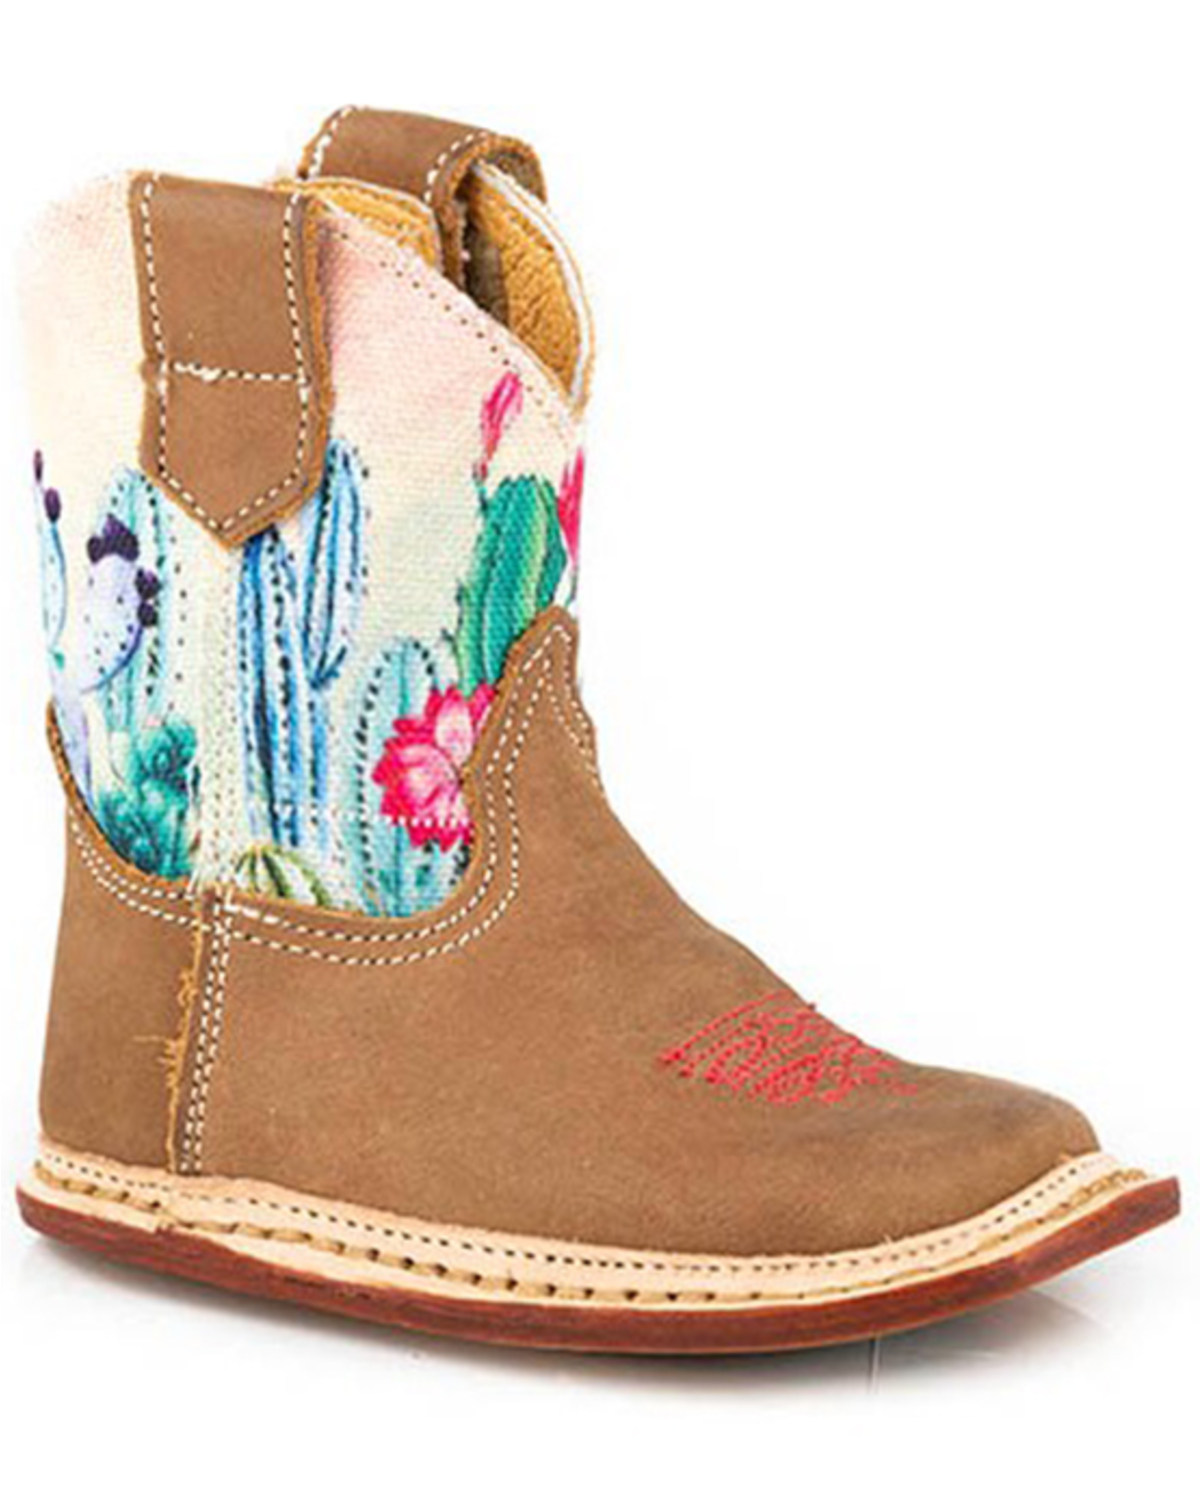 Roper Infant Girls' Cacti Western Boots - Broad Square Toe